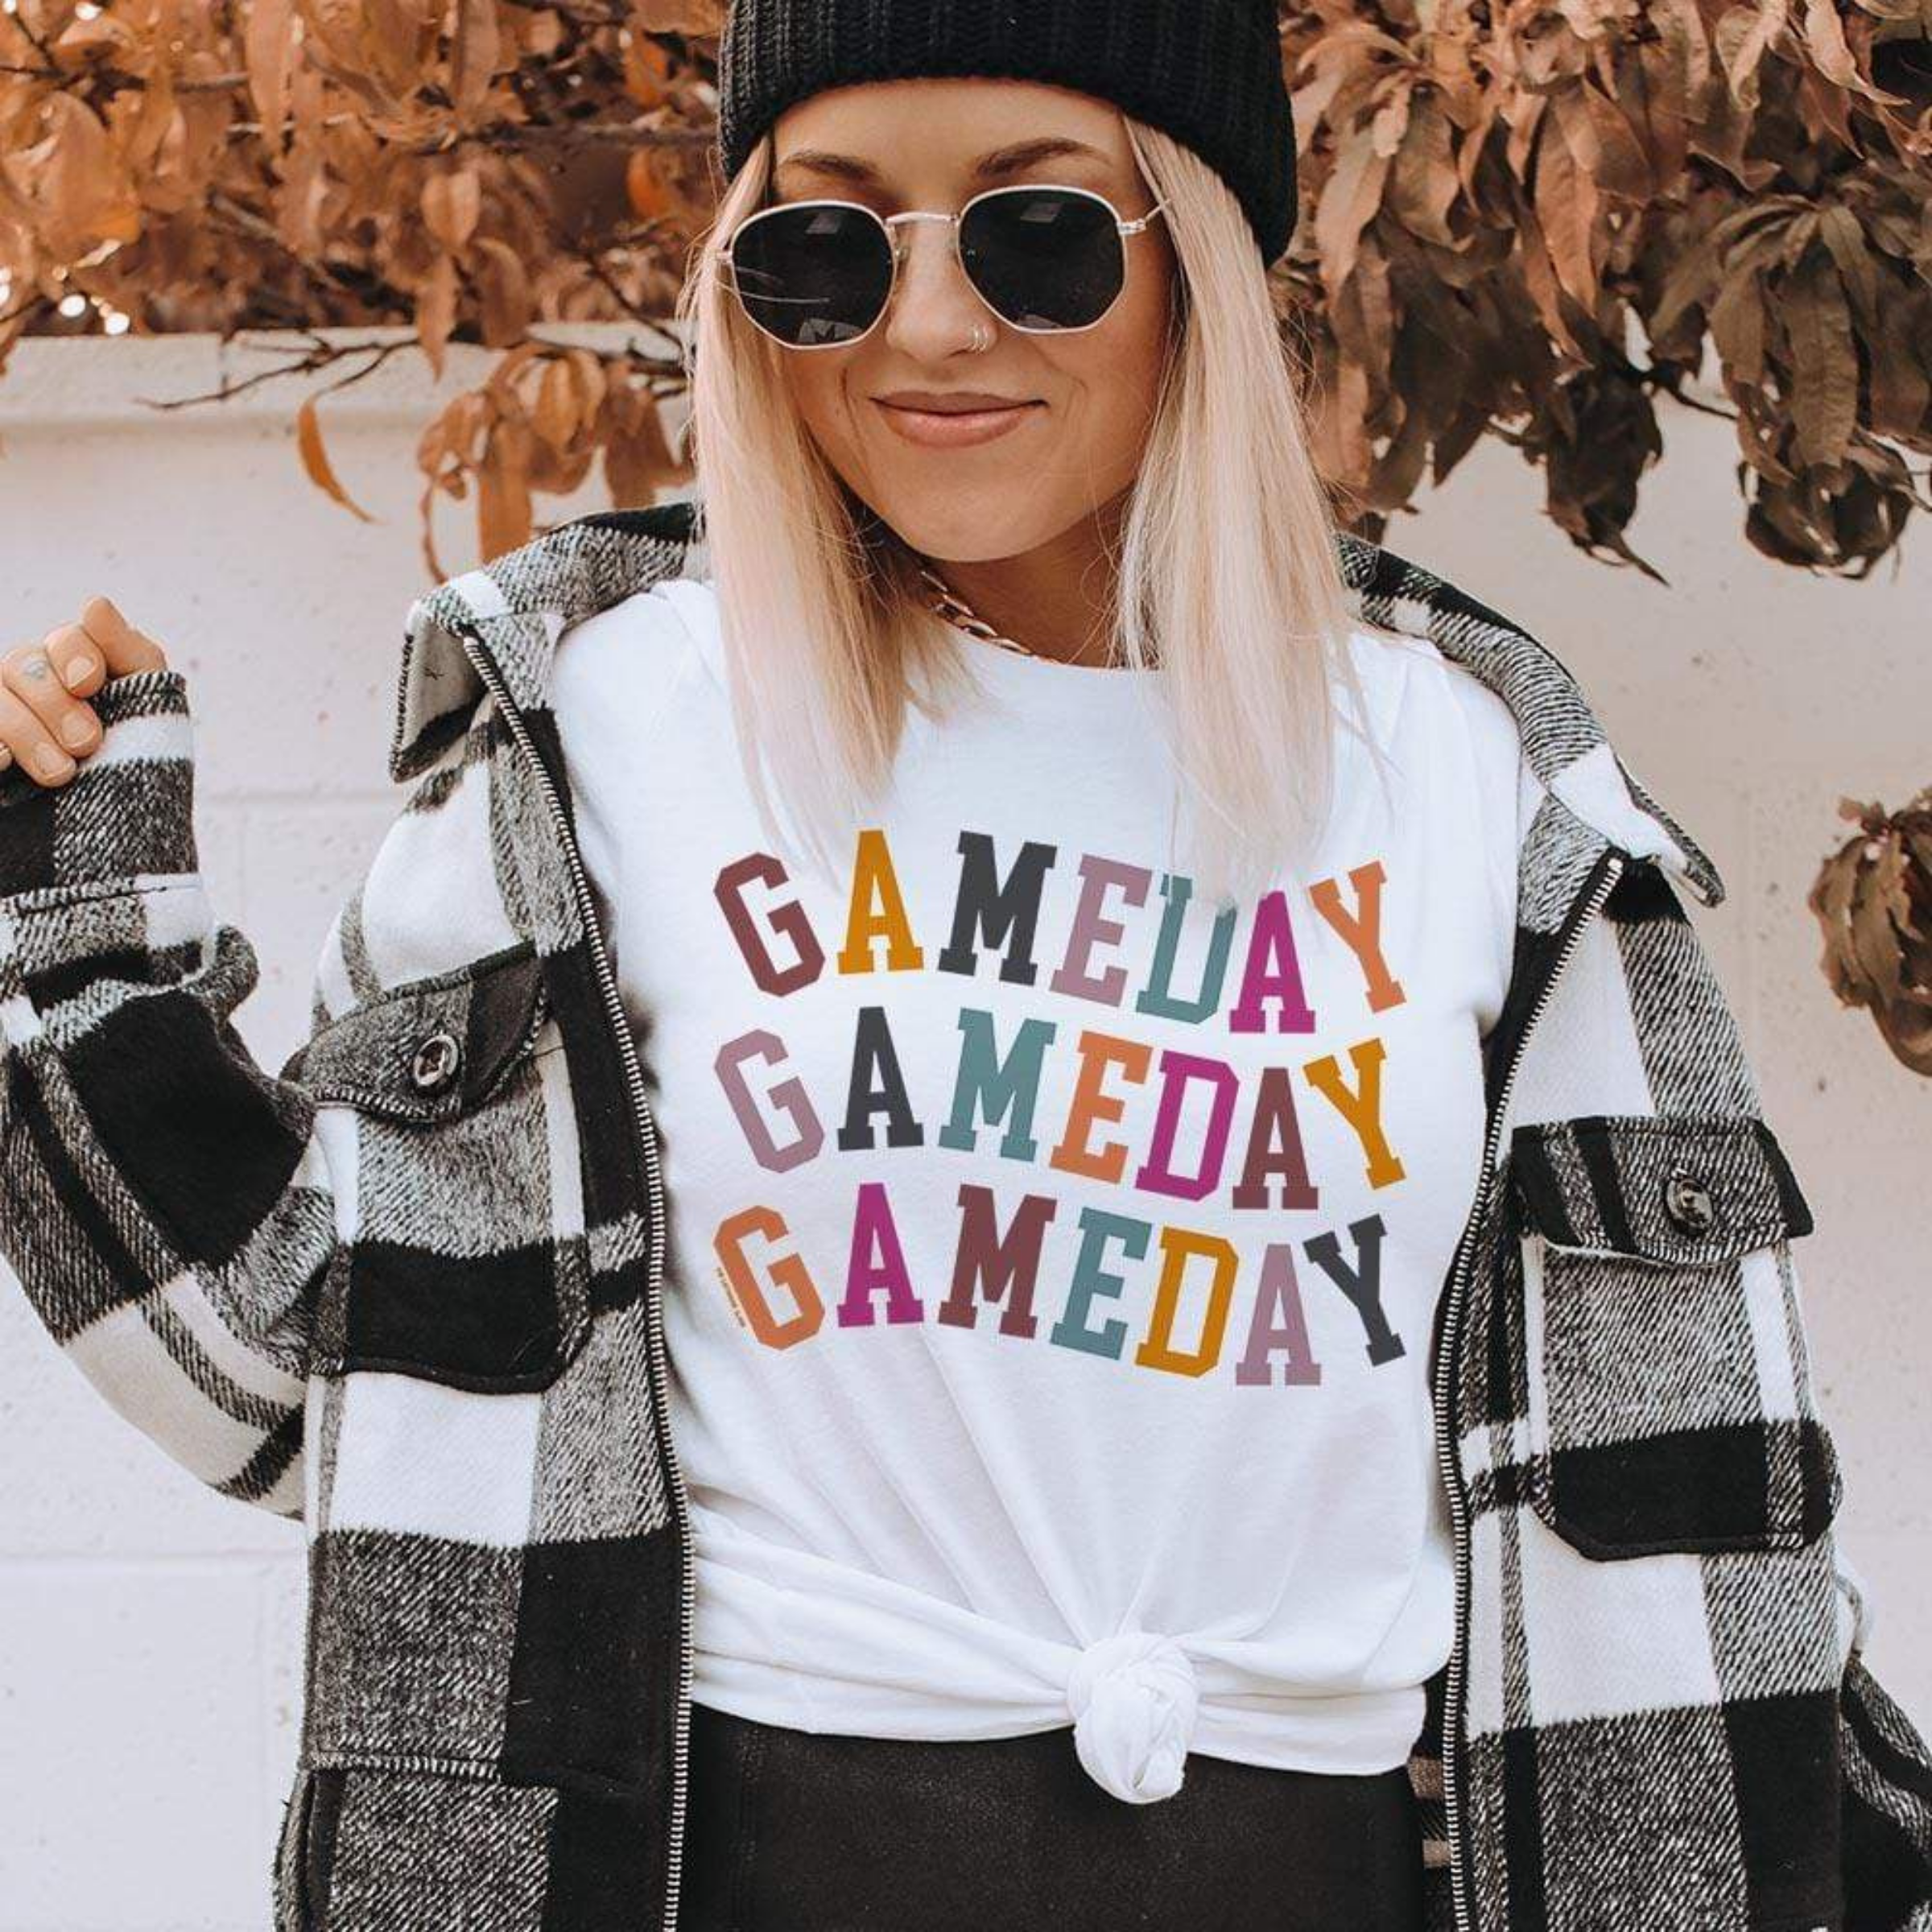 Model is wearing a white short sleeve crewneck tee featuring a multicolor graphic of the words "Gameday"